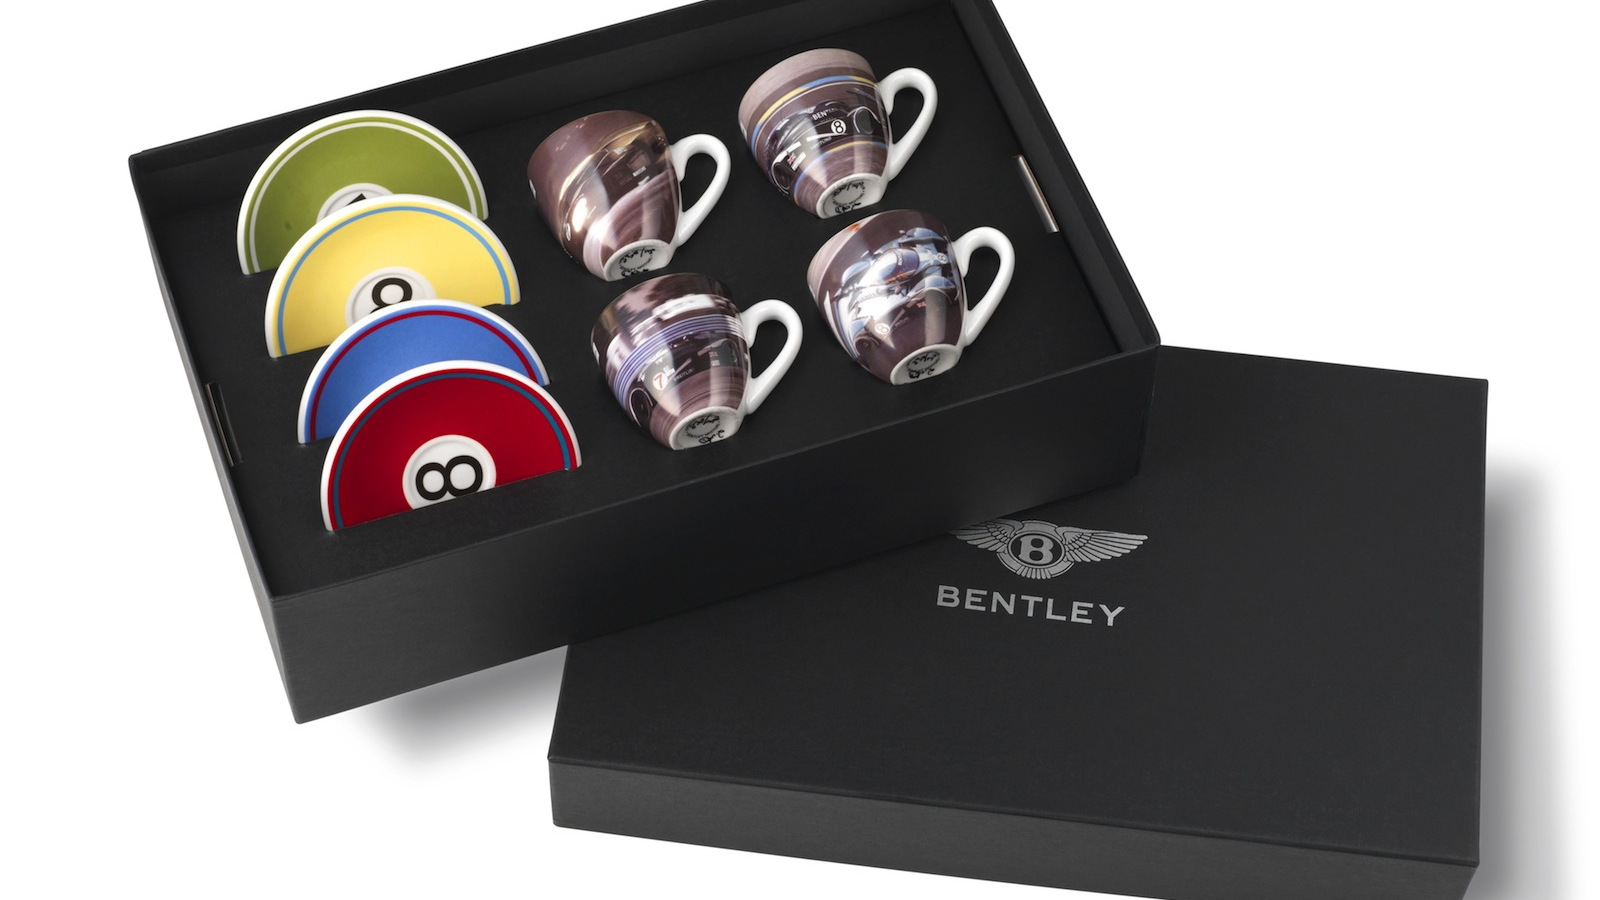 Bentley's 2012 holiday gift collection